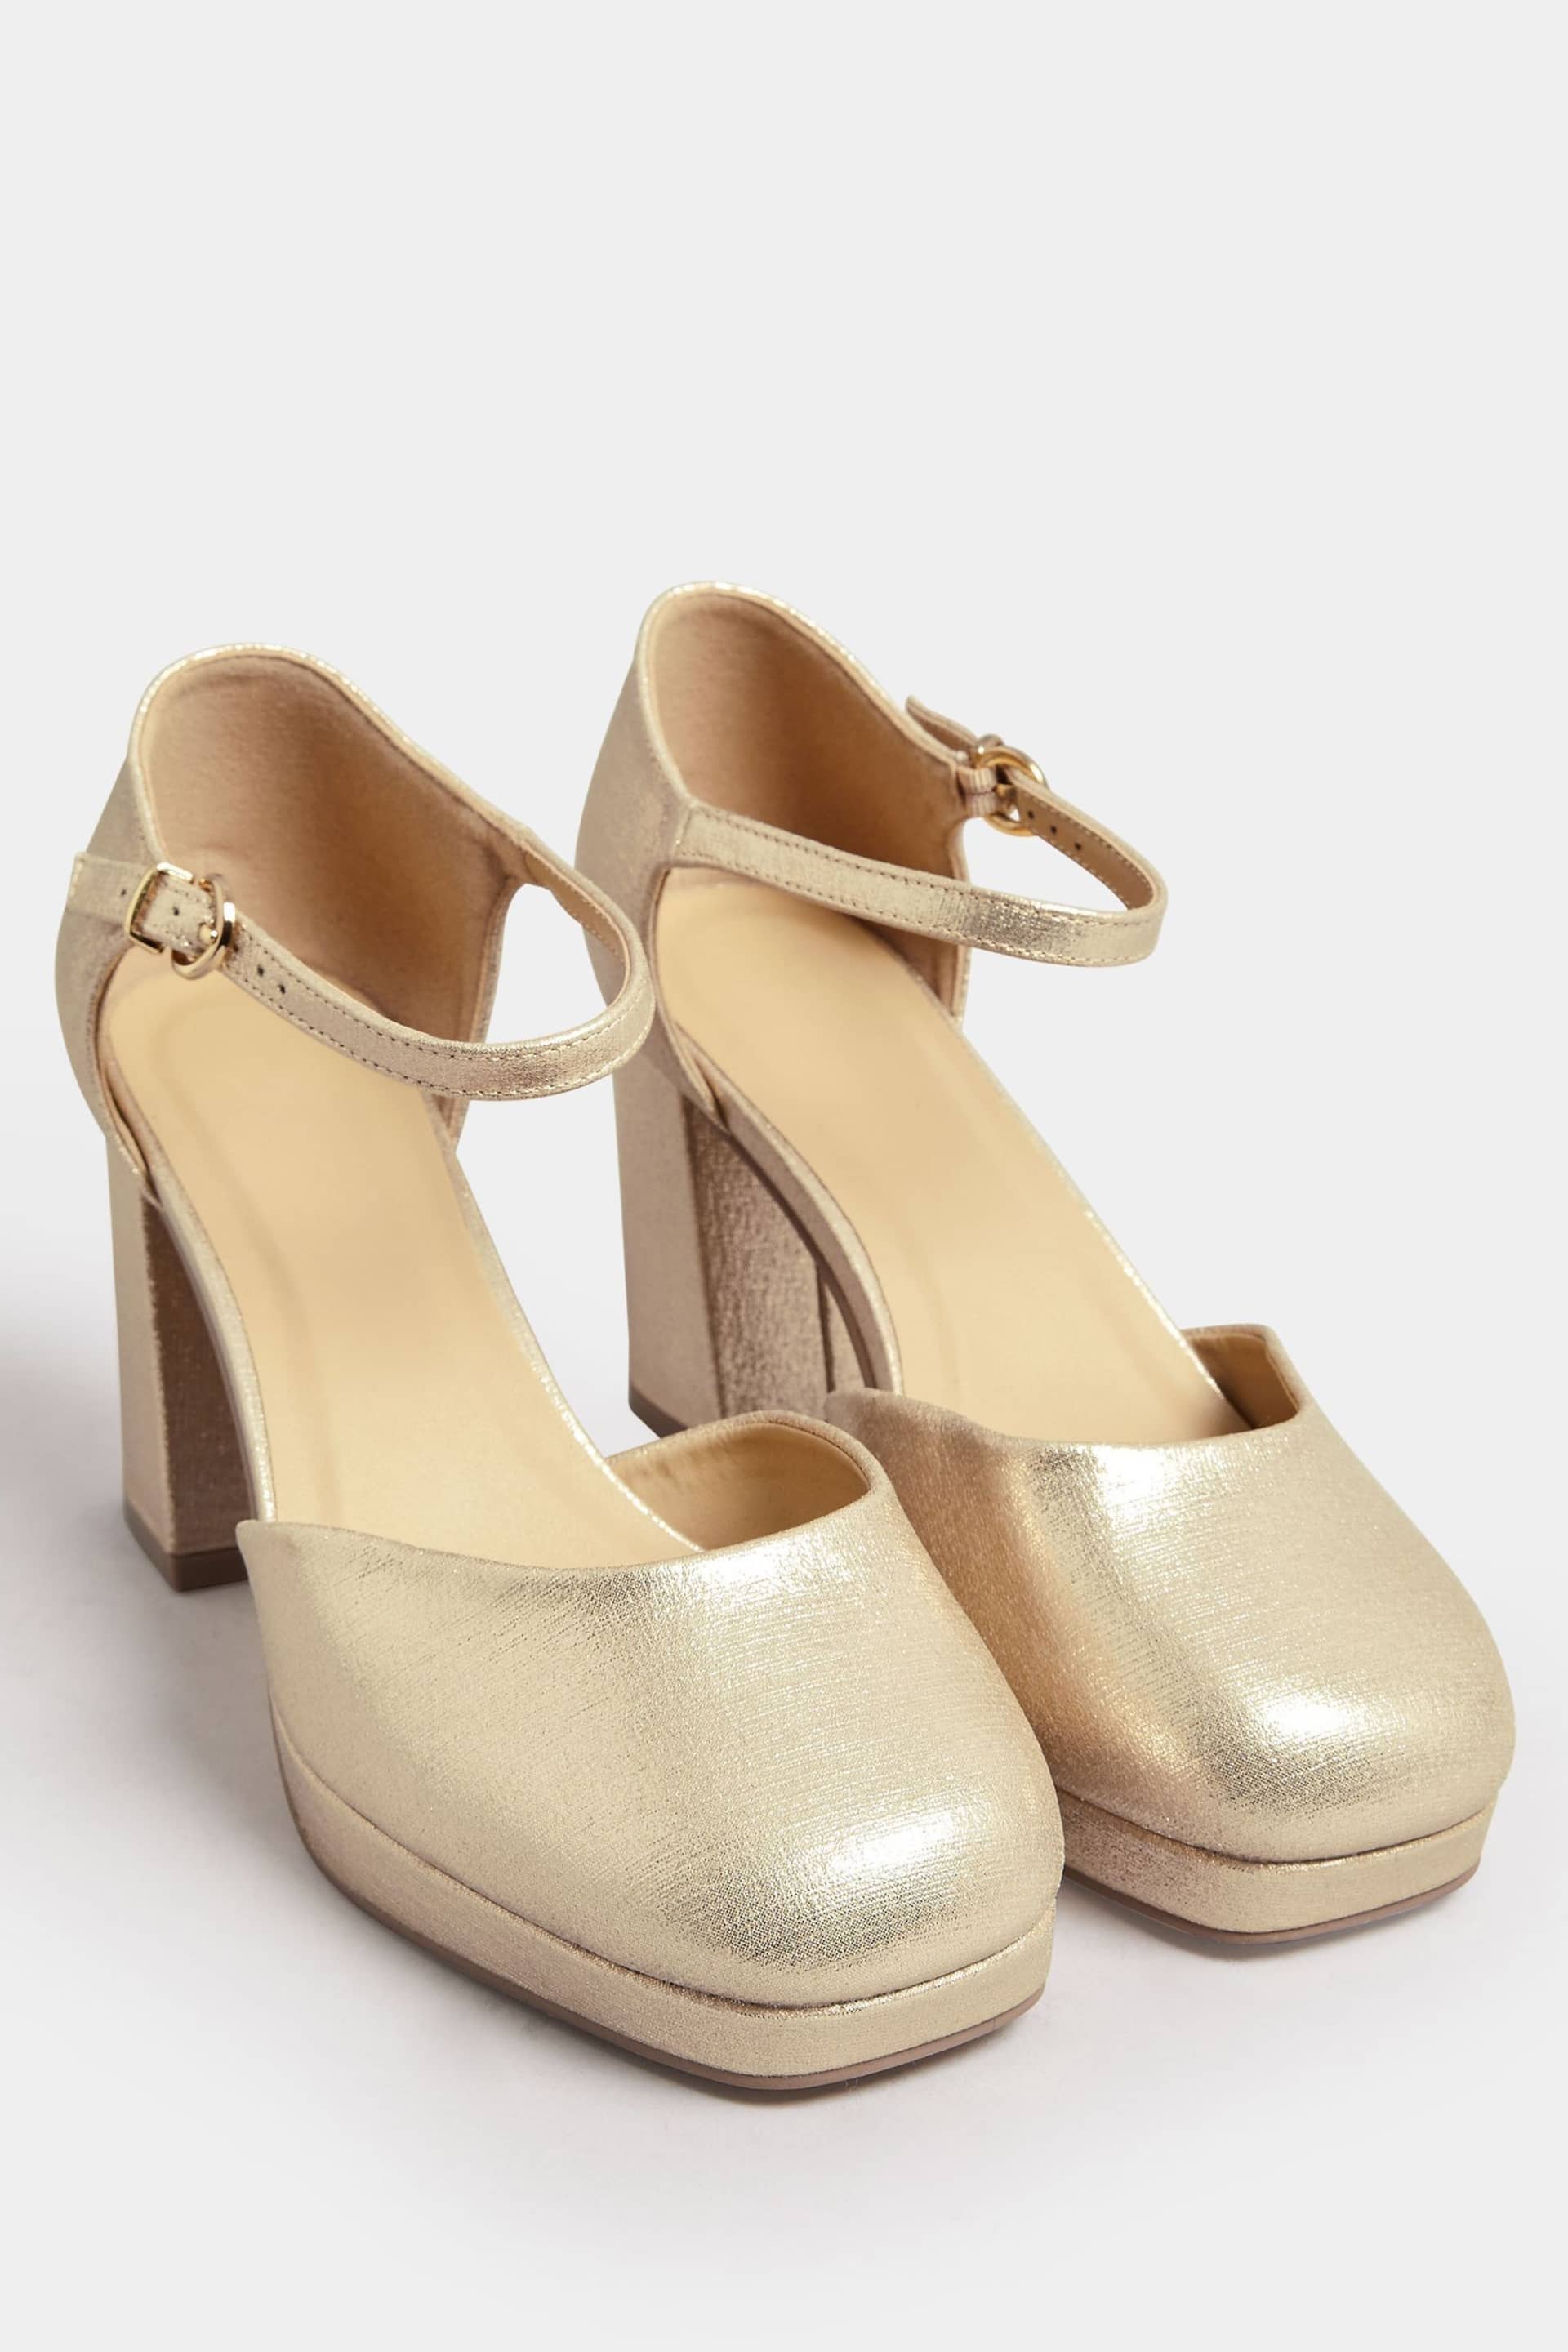 Yours Curve Gold Extra-Wide Fit Platform Court Shoes - Image 2 of 4